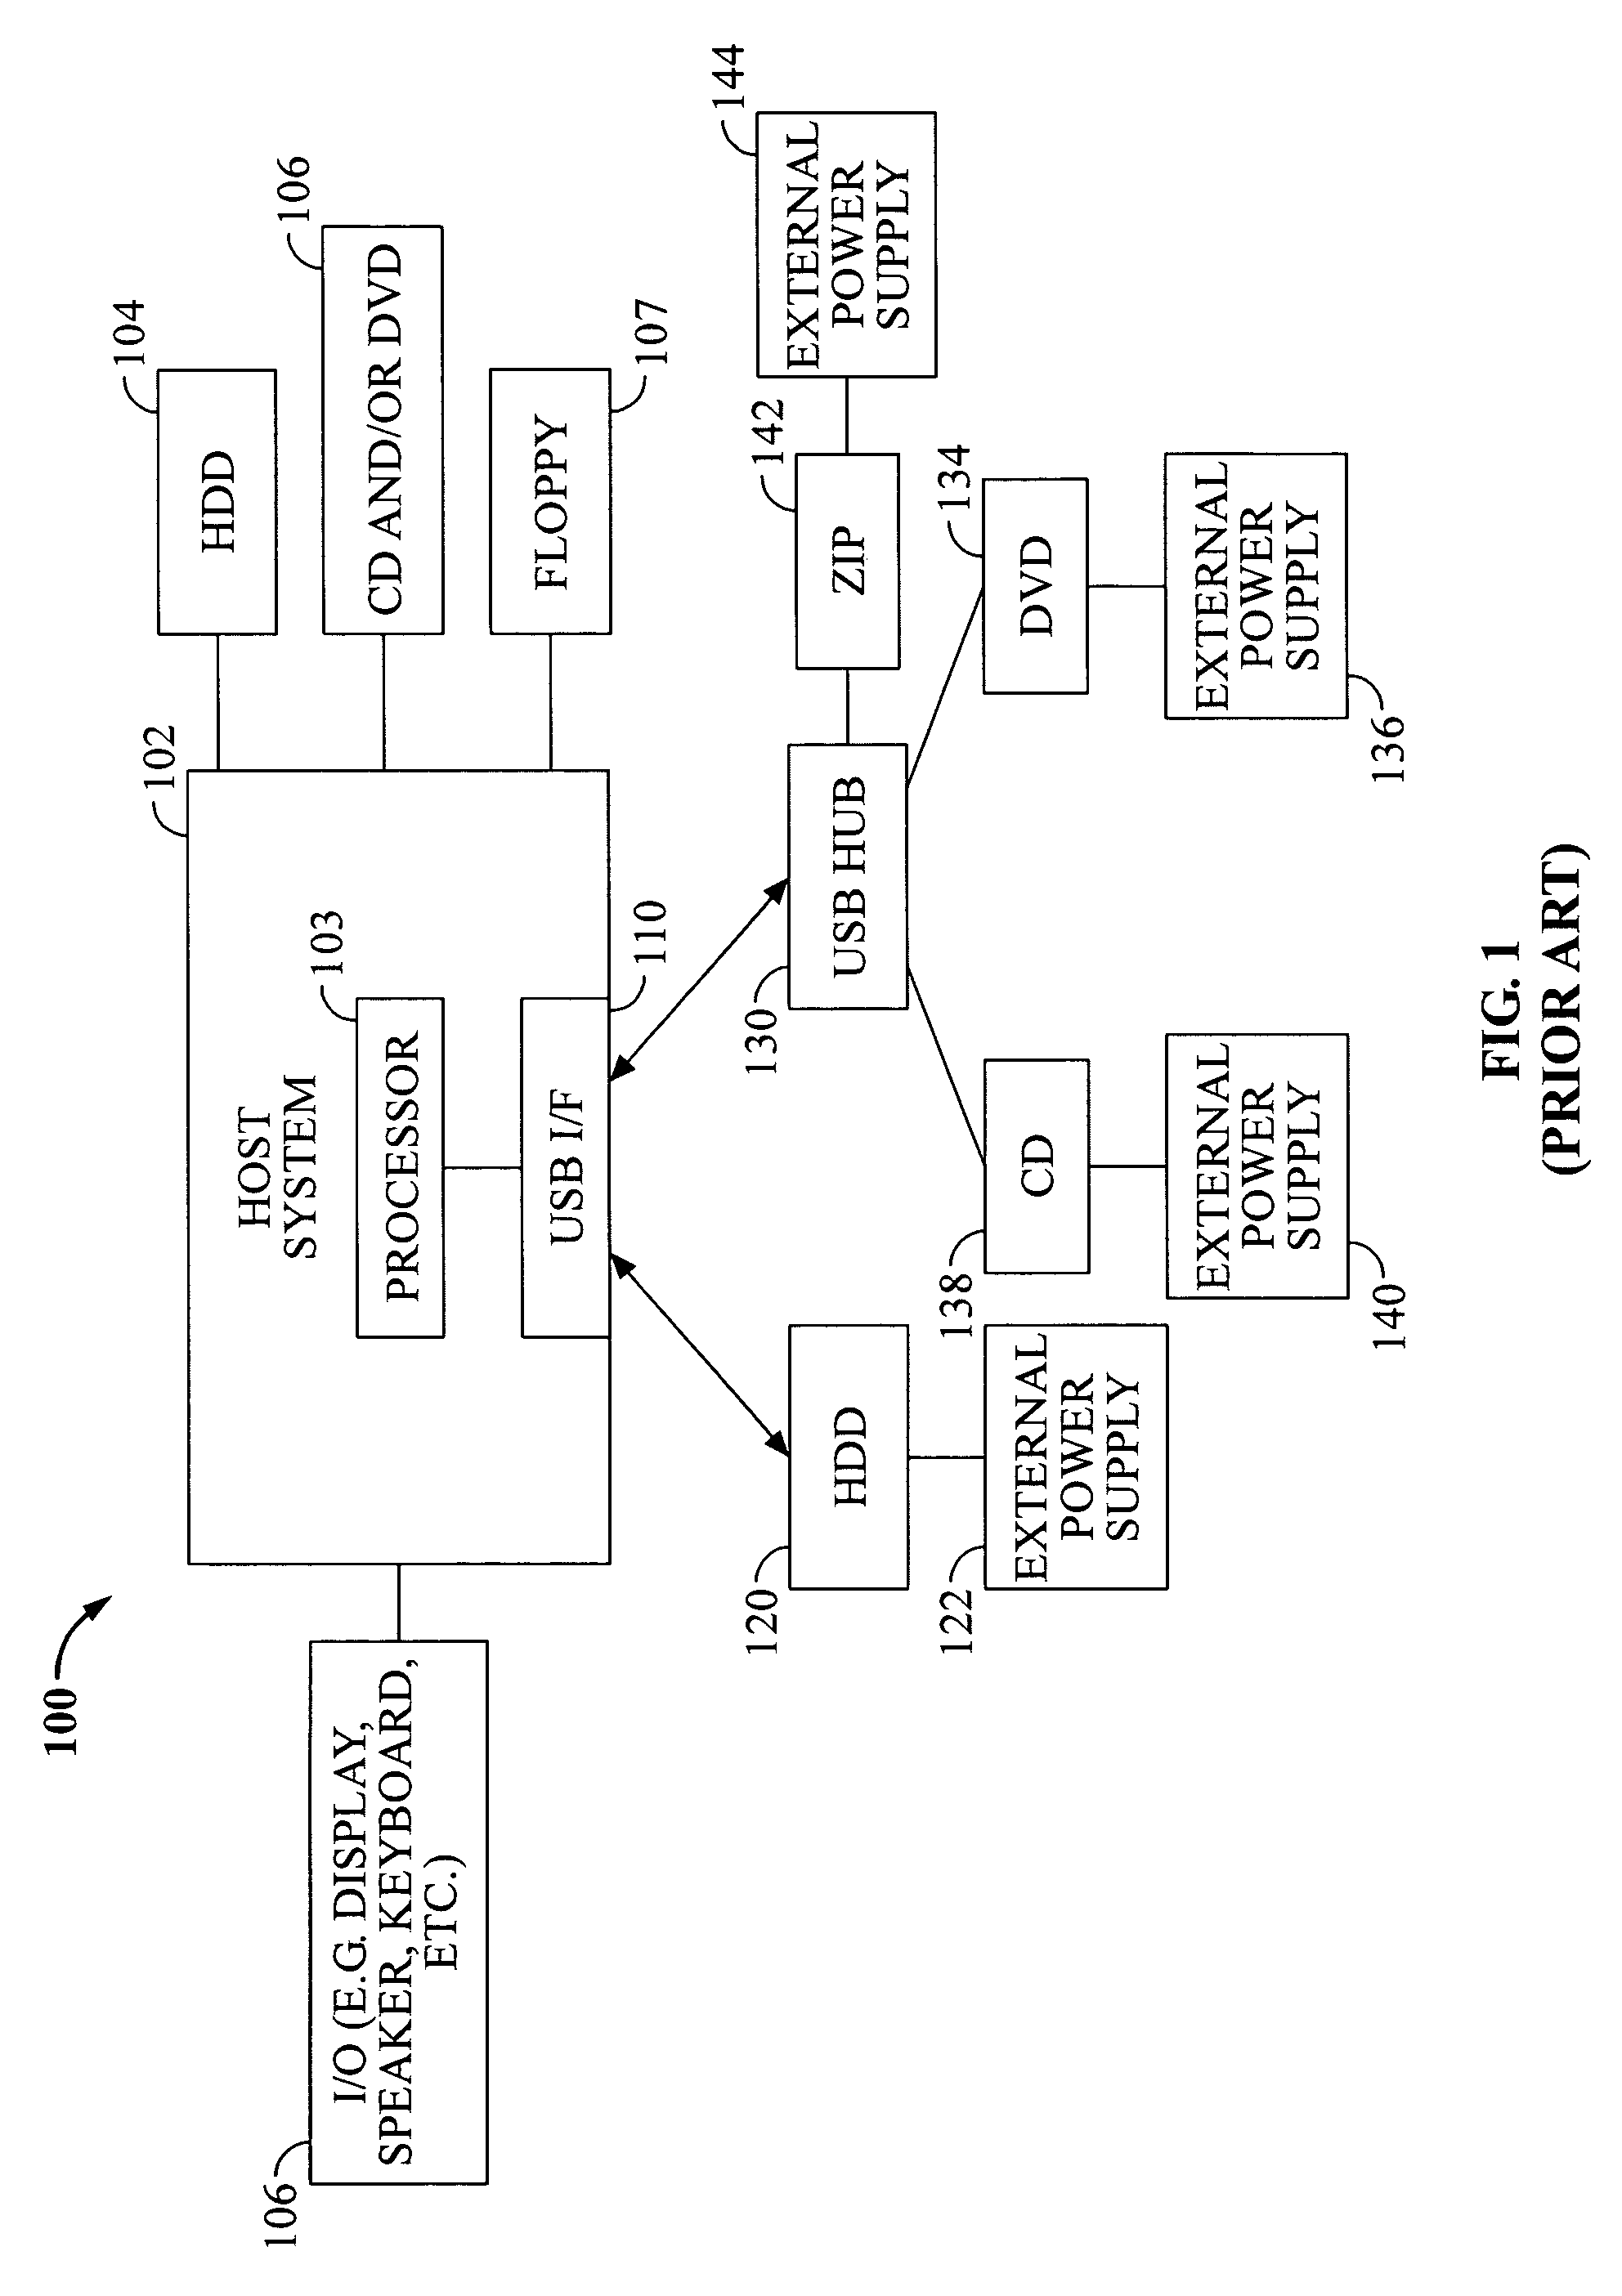 External memory device to provide disk device and optical device functionality